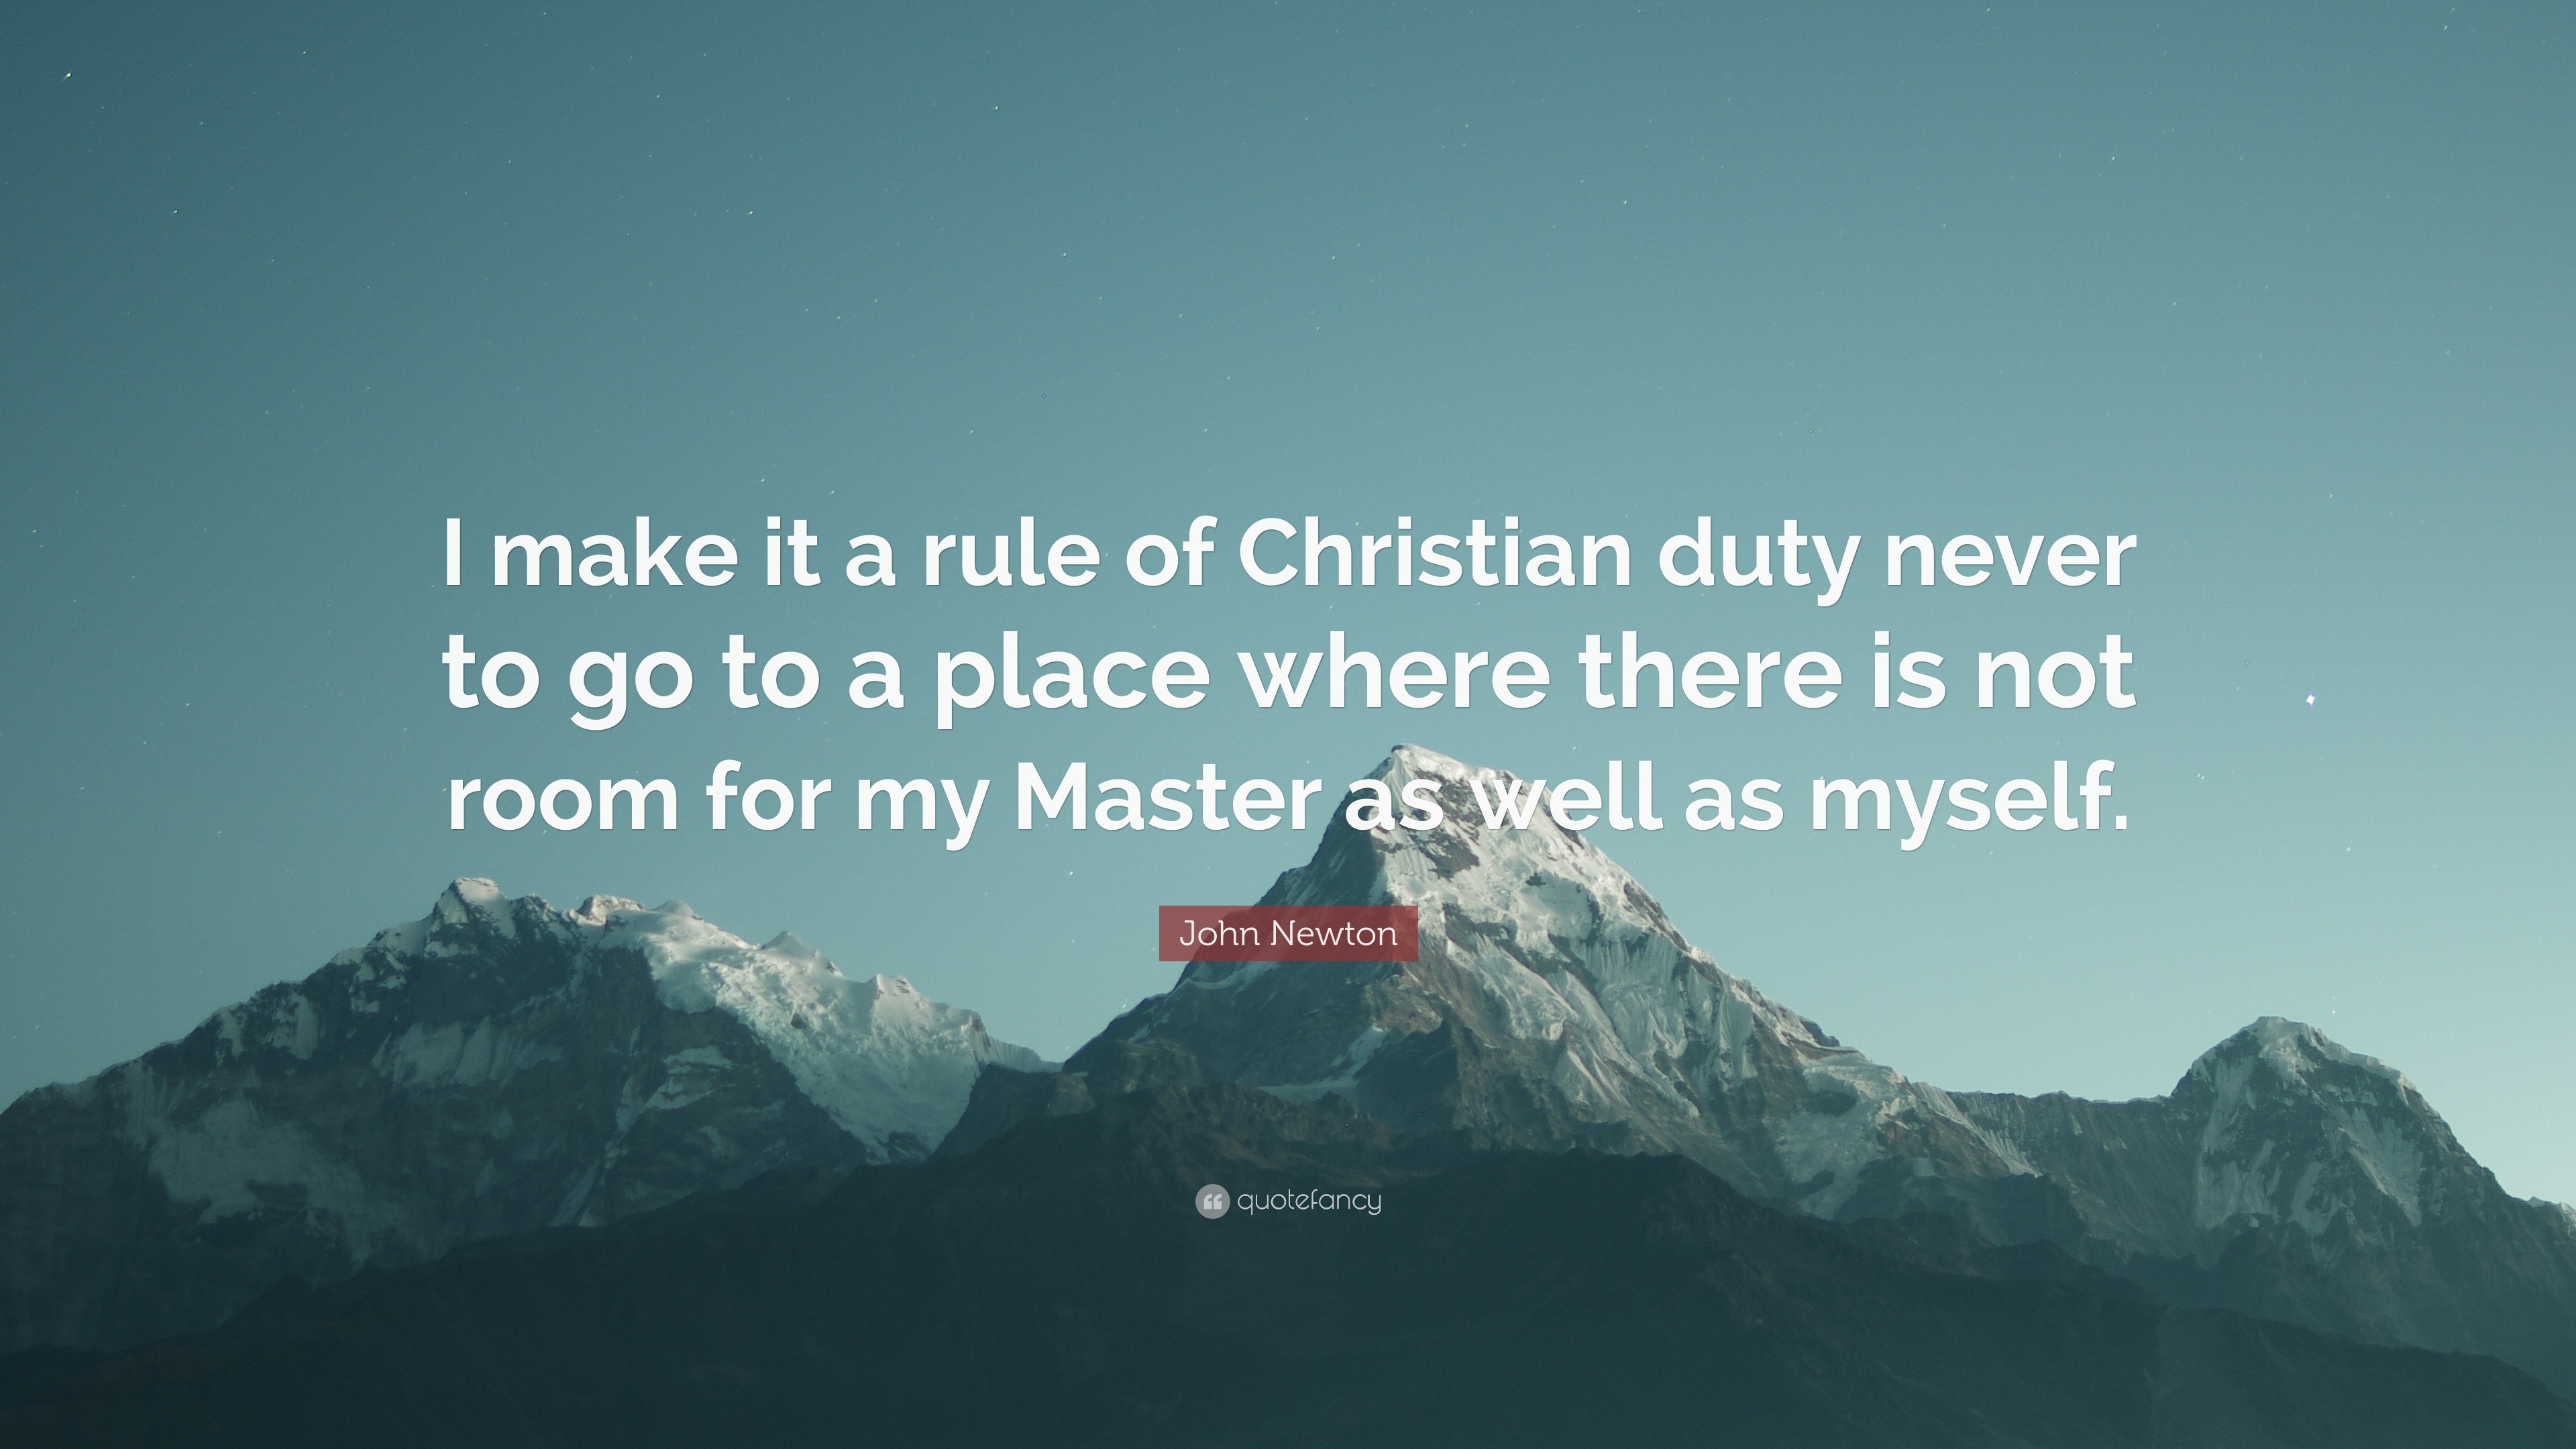 John Newton Quote: “I make it a rule of Christian duty never to go ...